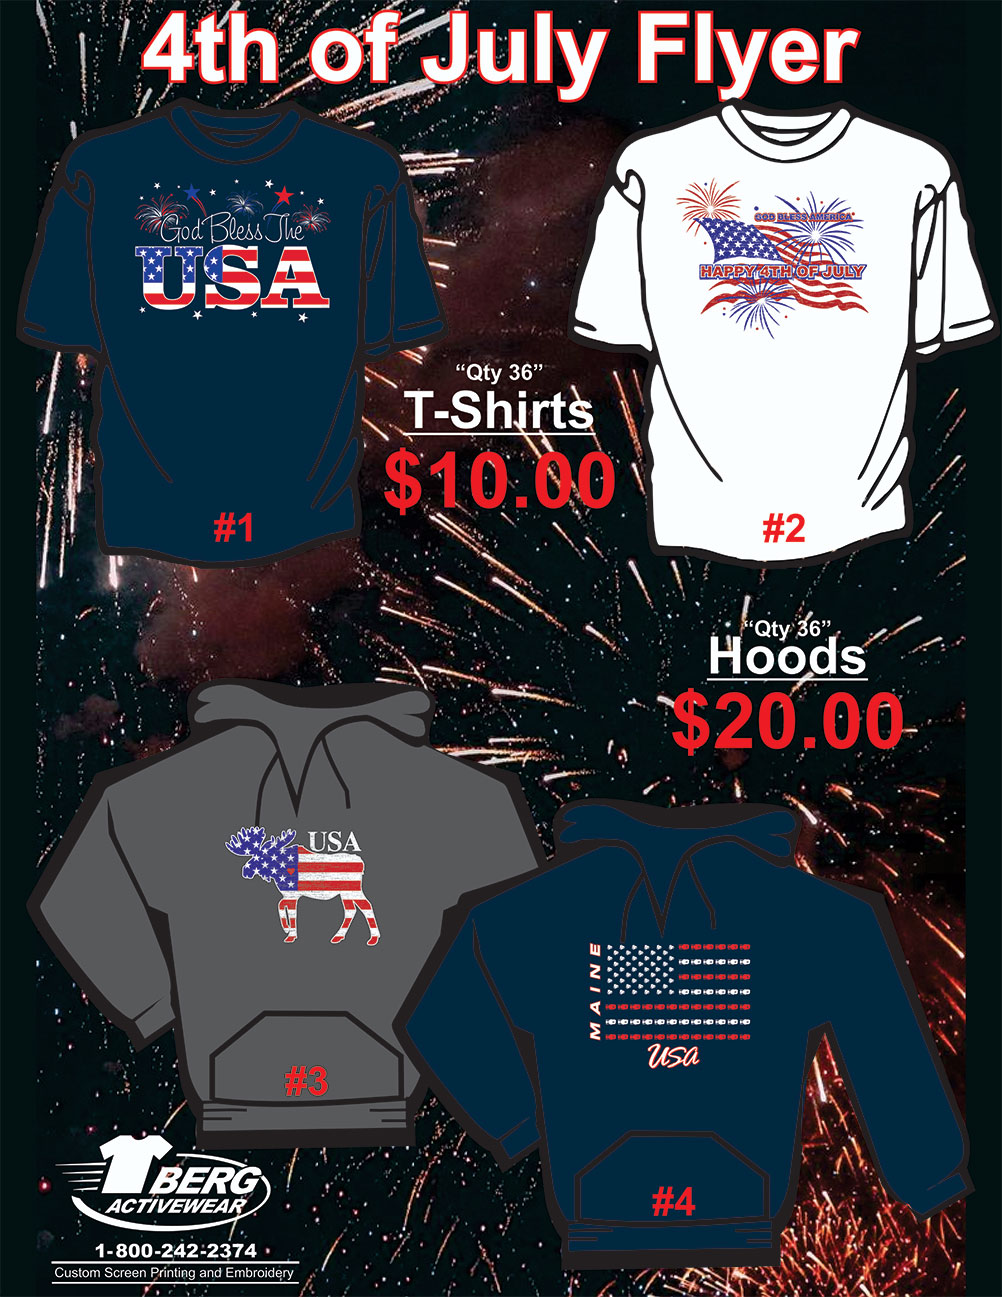 4th of July Sale Shirts & Hoodies Available - Call for more information!